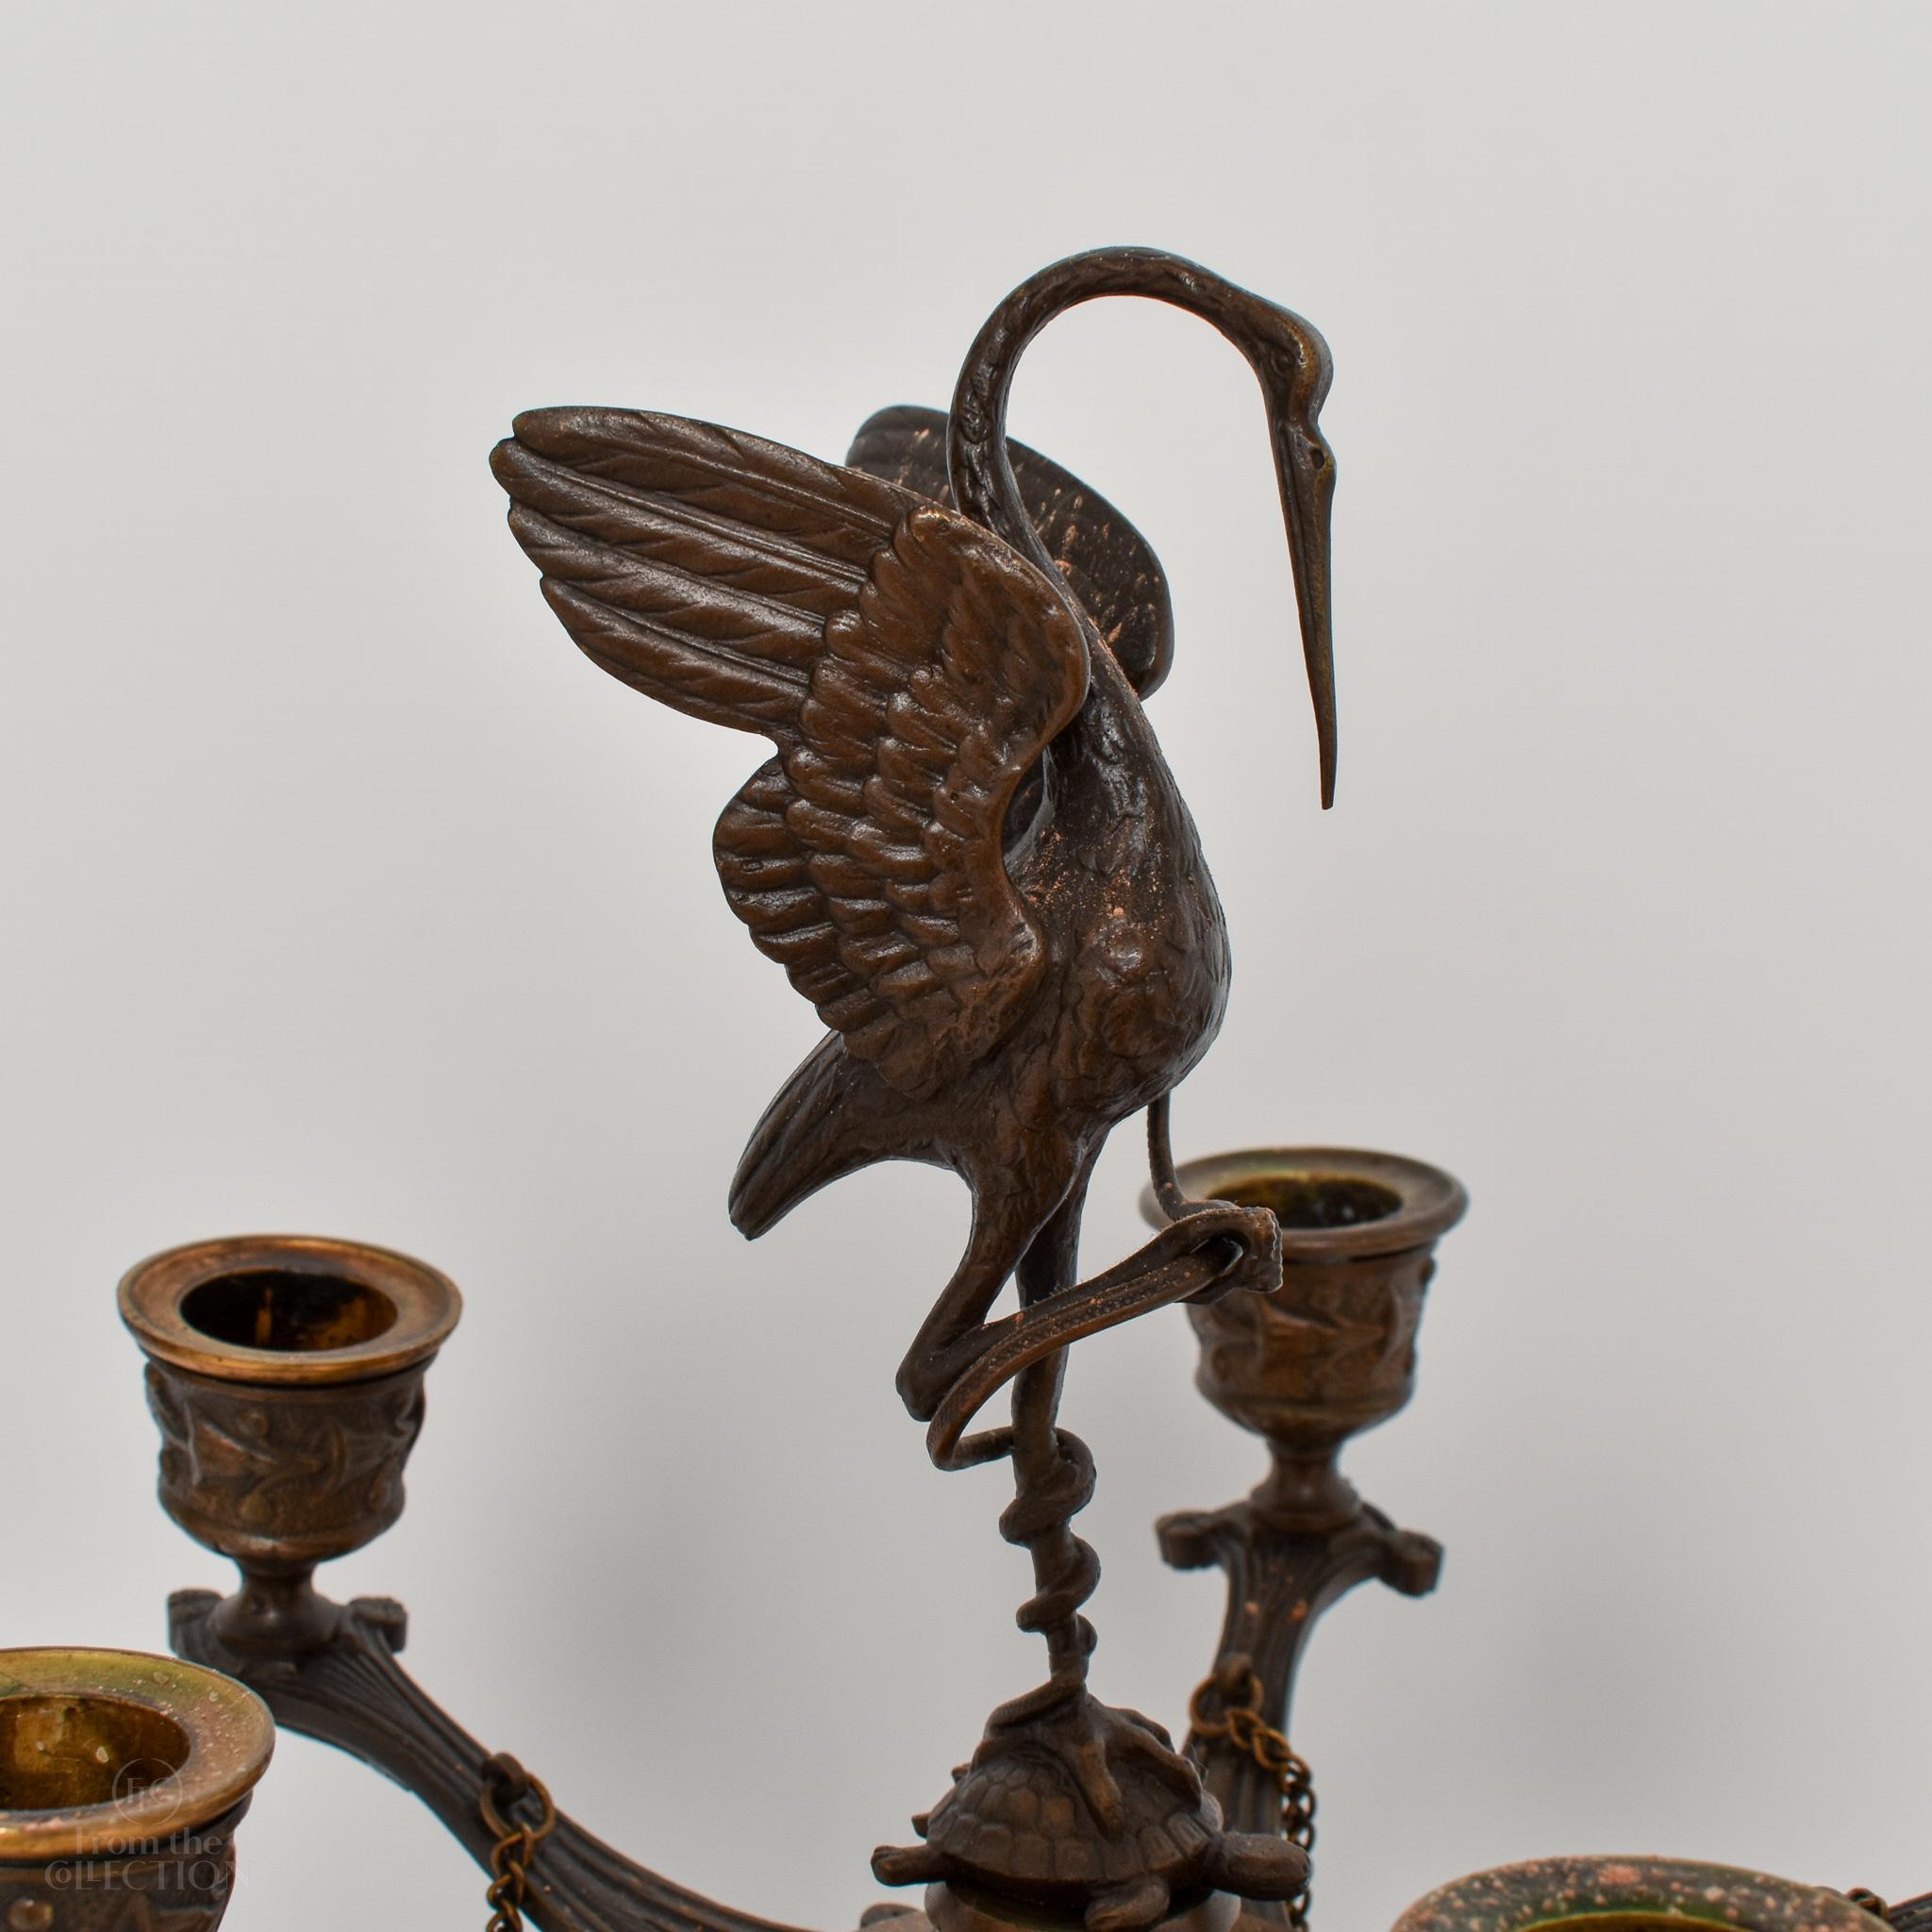 Pair of beautiful bronze regency crane candelabras circa 1820. The crane atop the pair is wonderfully detailed. There are feet for them to stand. A magnificent pair. These are beautifully decorated candelabra that would enhance a period or